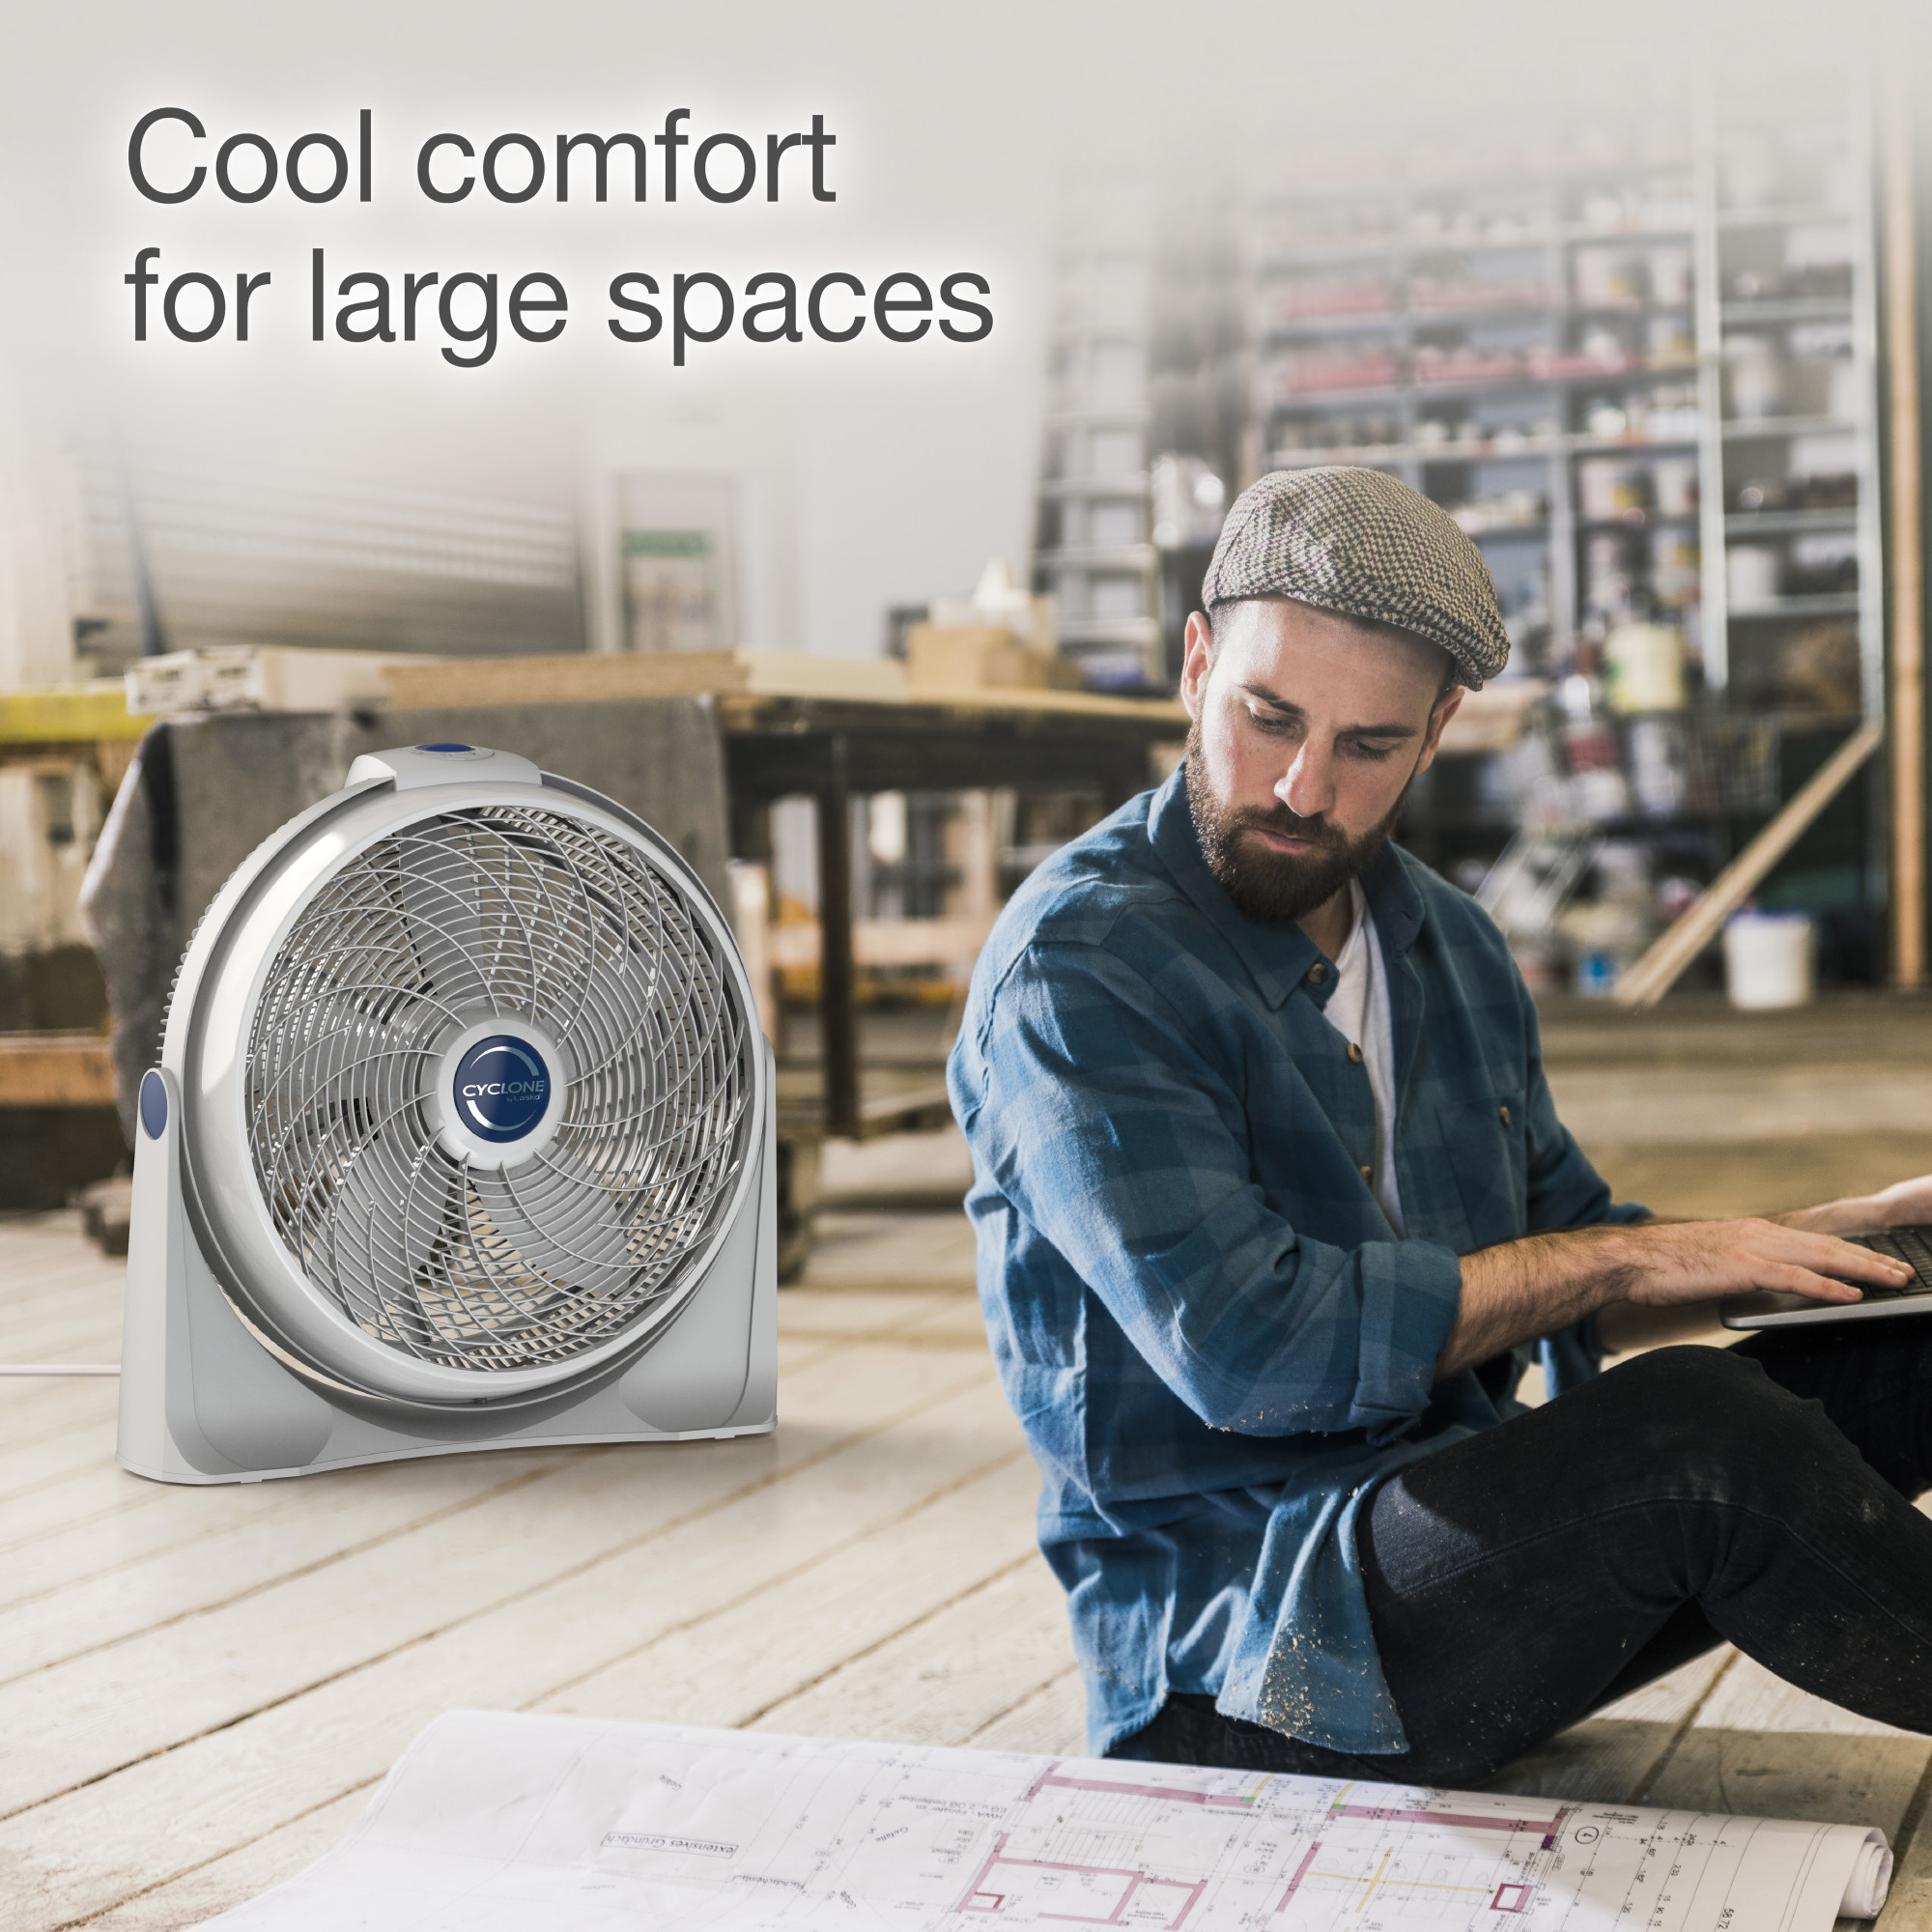 Lasko 20" Cyclone Air Circulator Floor Fan with Wall Mount Option, 23" Height, White, 3520, New - image 3 of 14